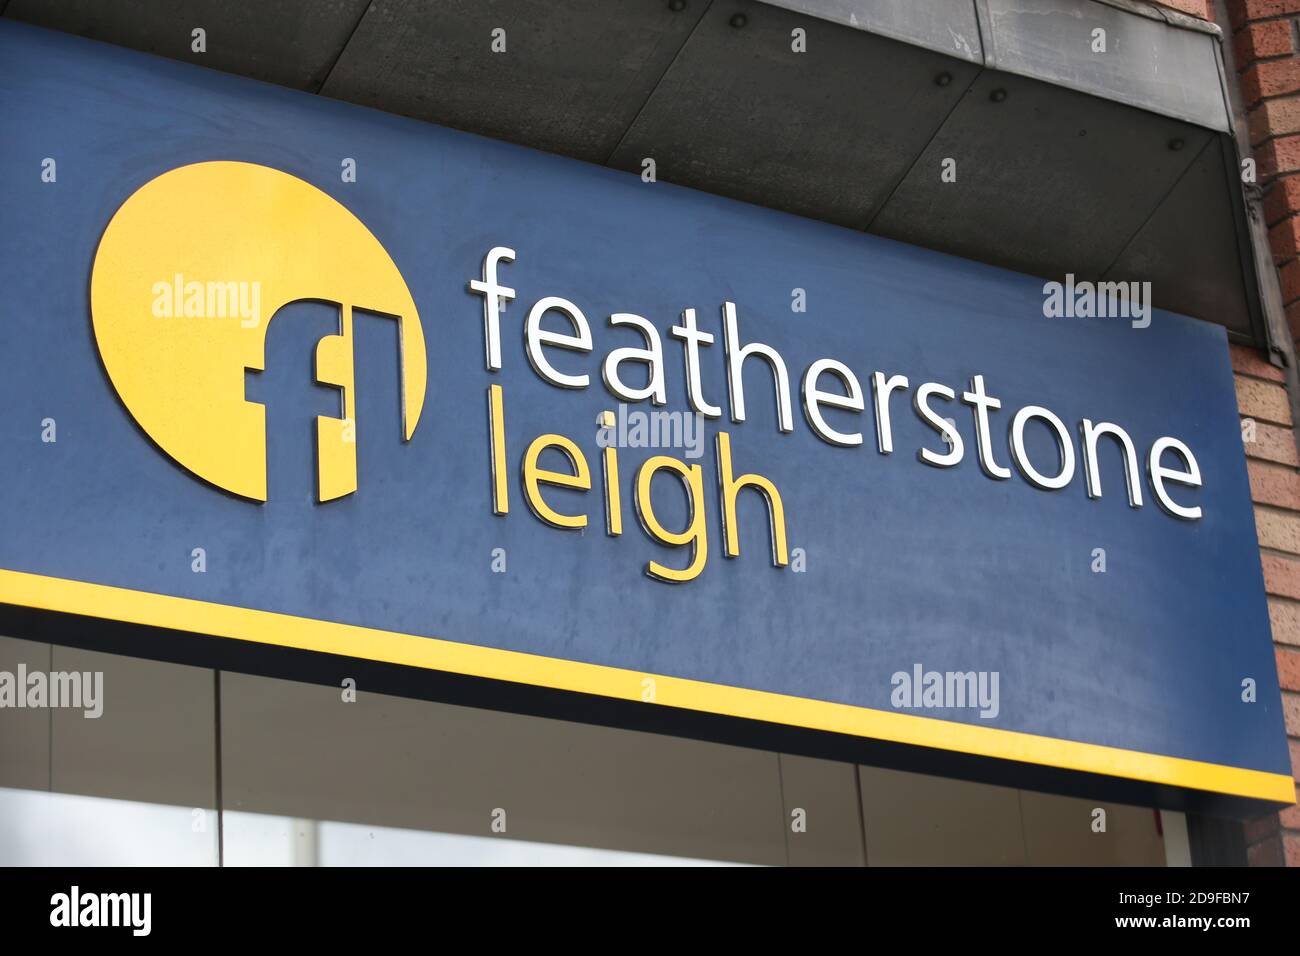 Featherstone Leigh sign, Kingston Upon Thames, Surrey Stock Photo